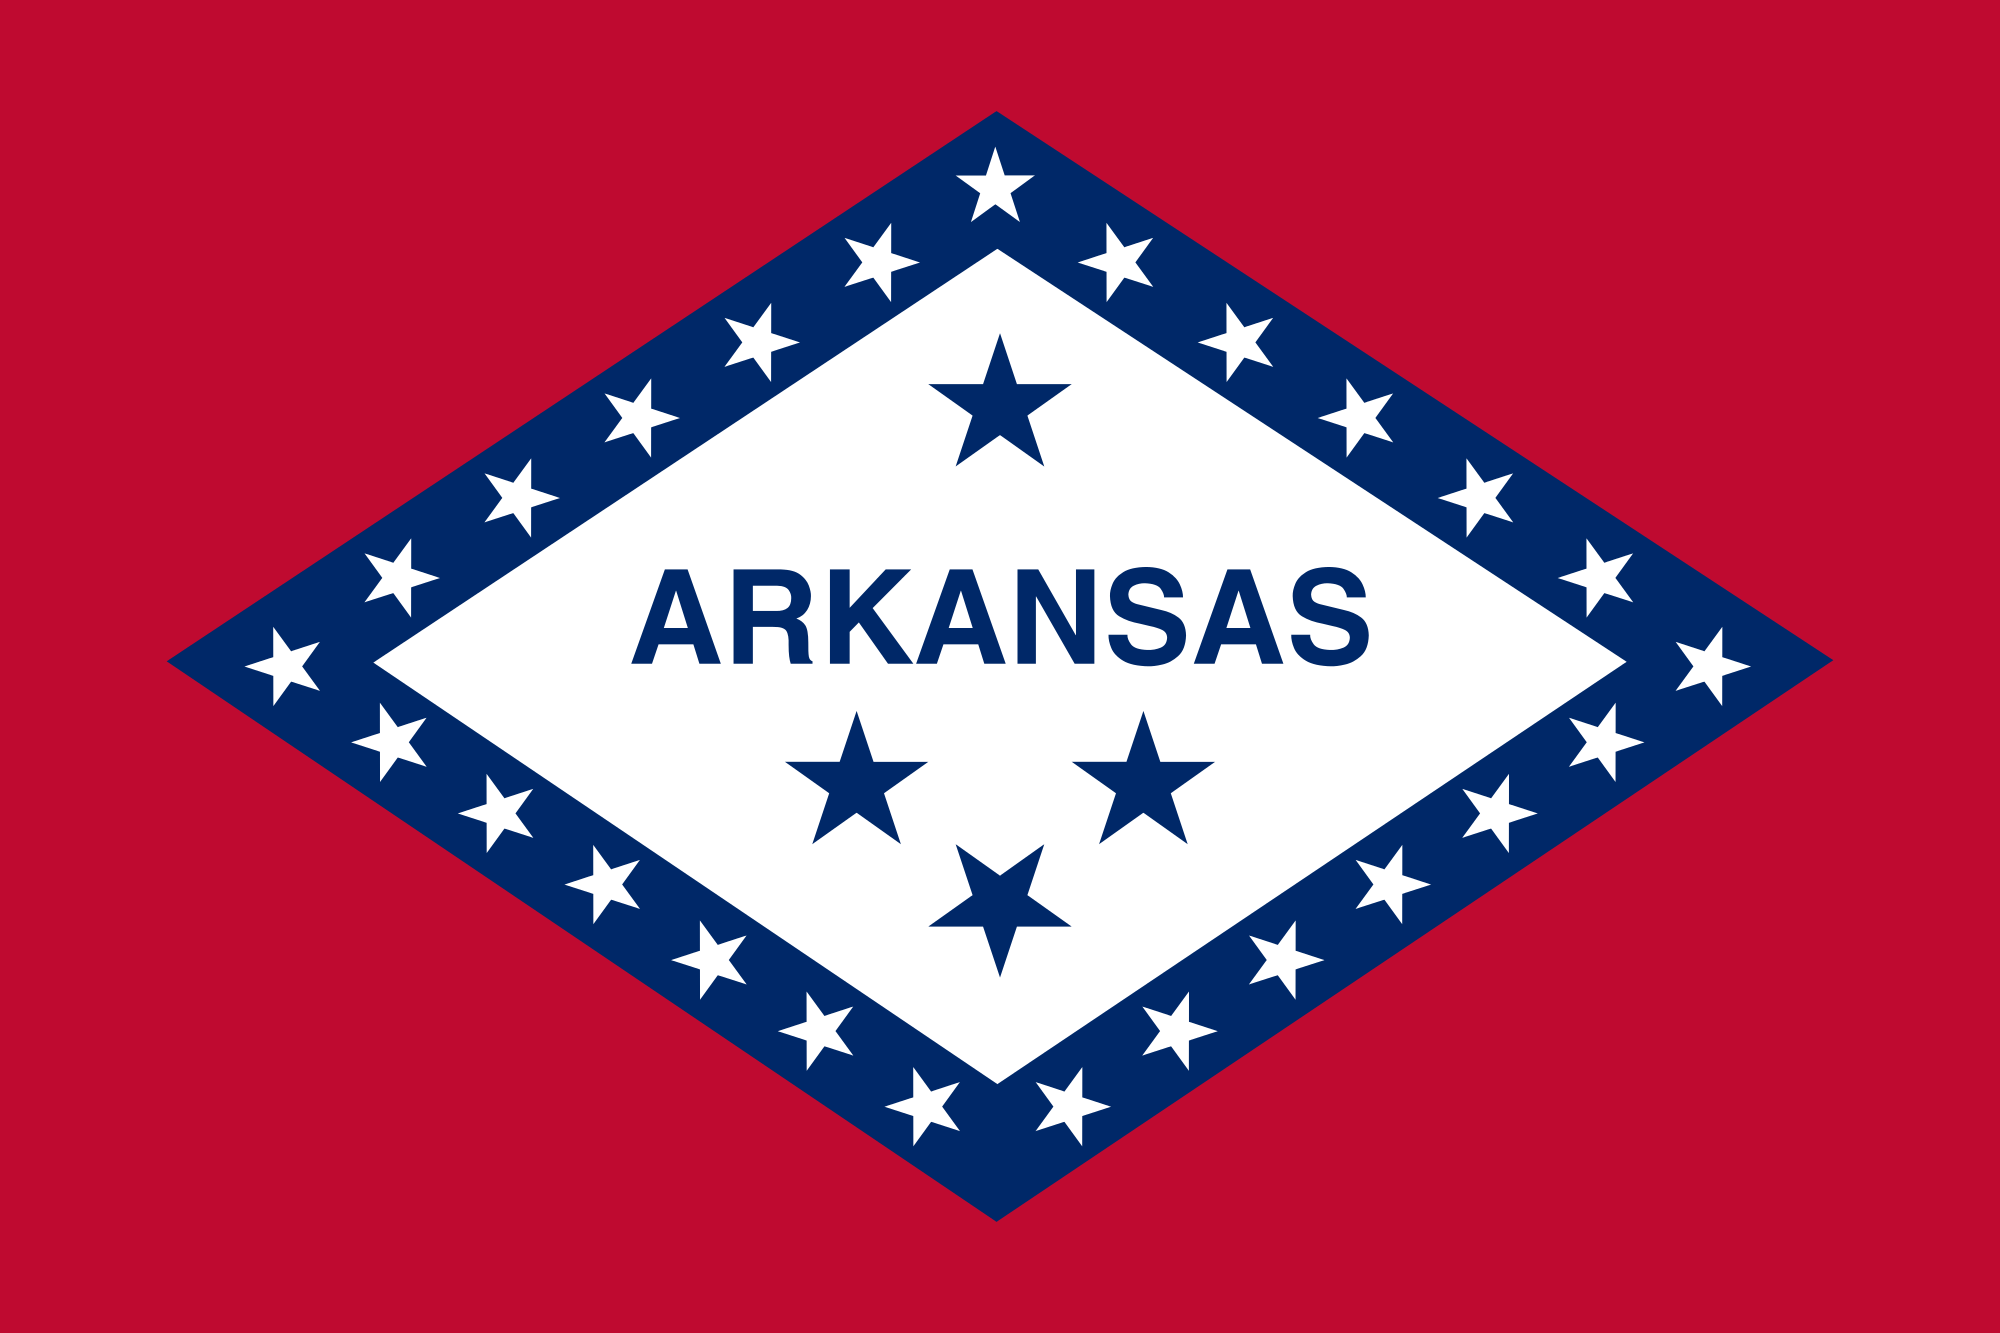 Arkansas State Holidays and Info. from Holidays and Observances